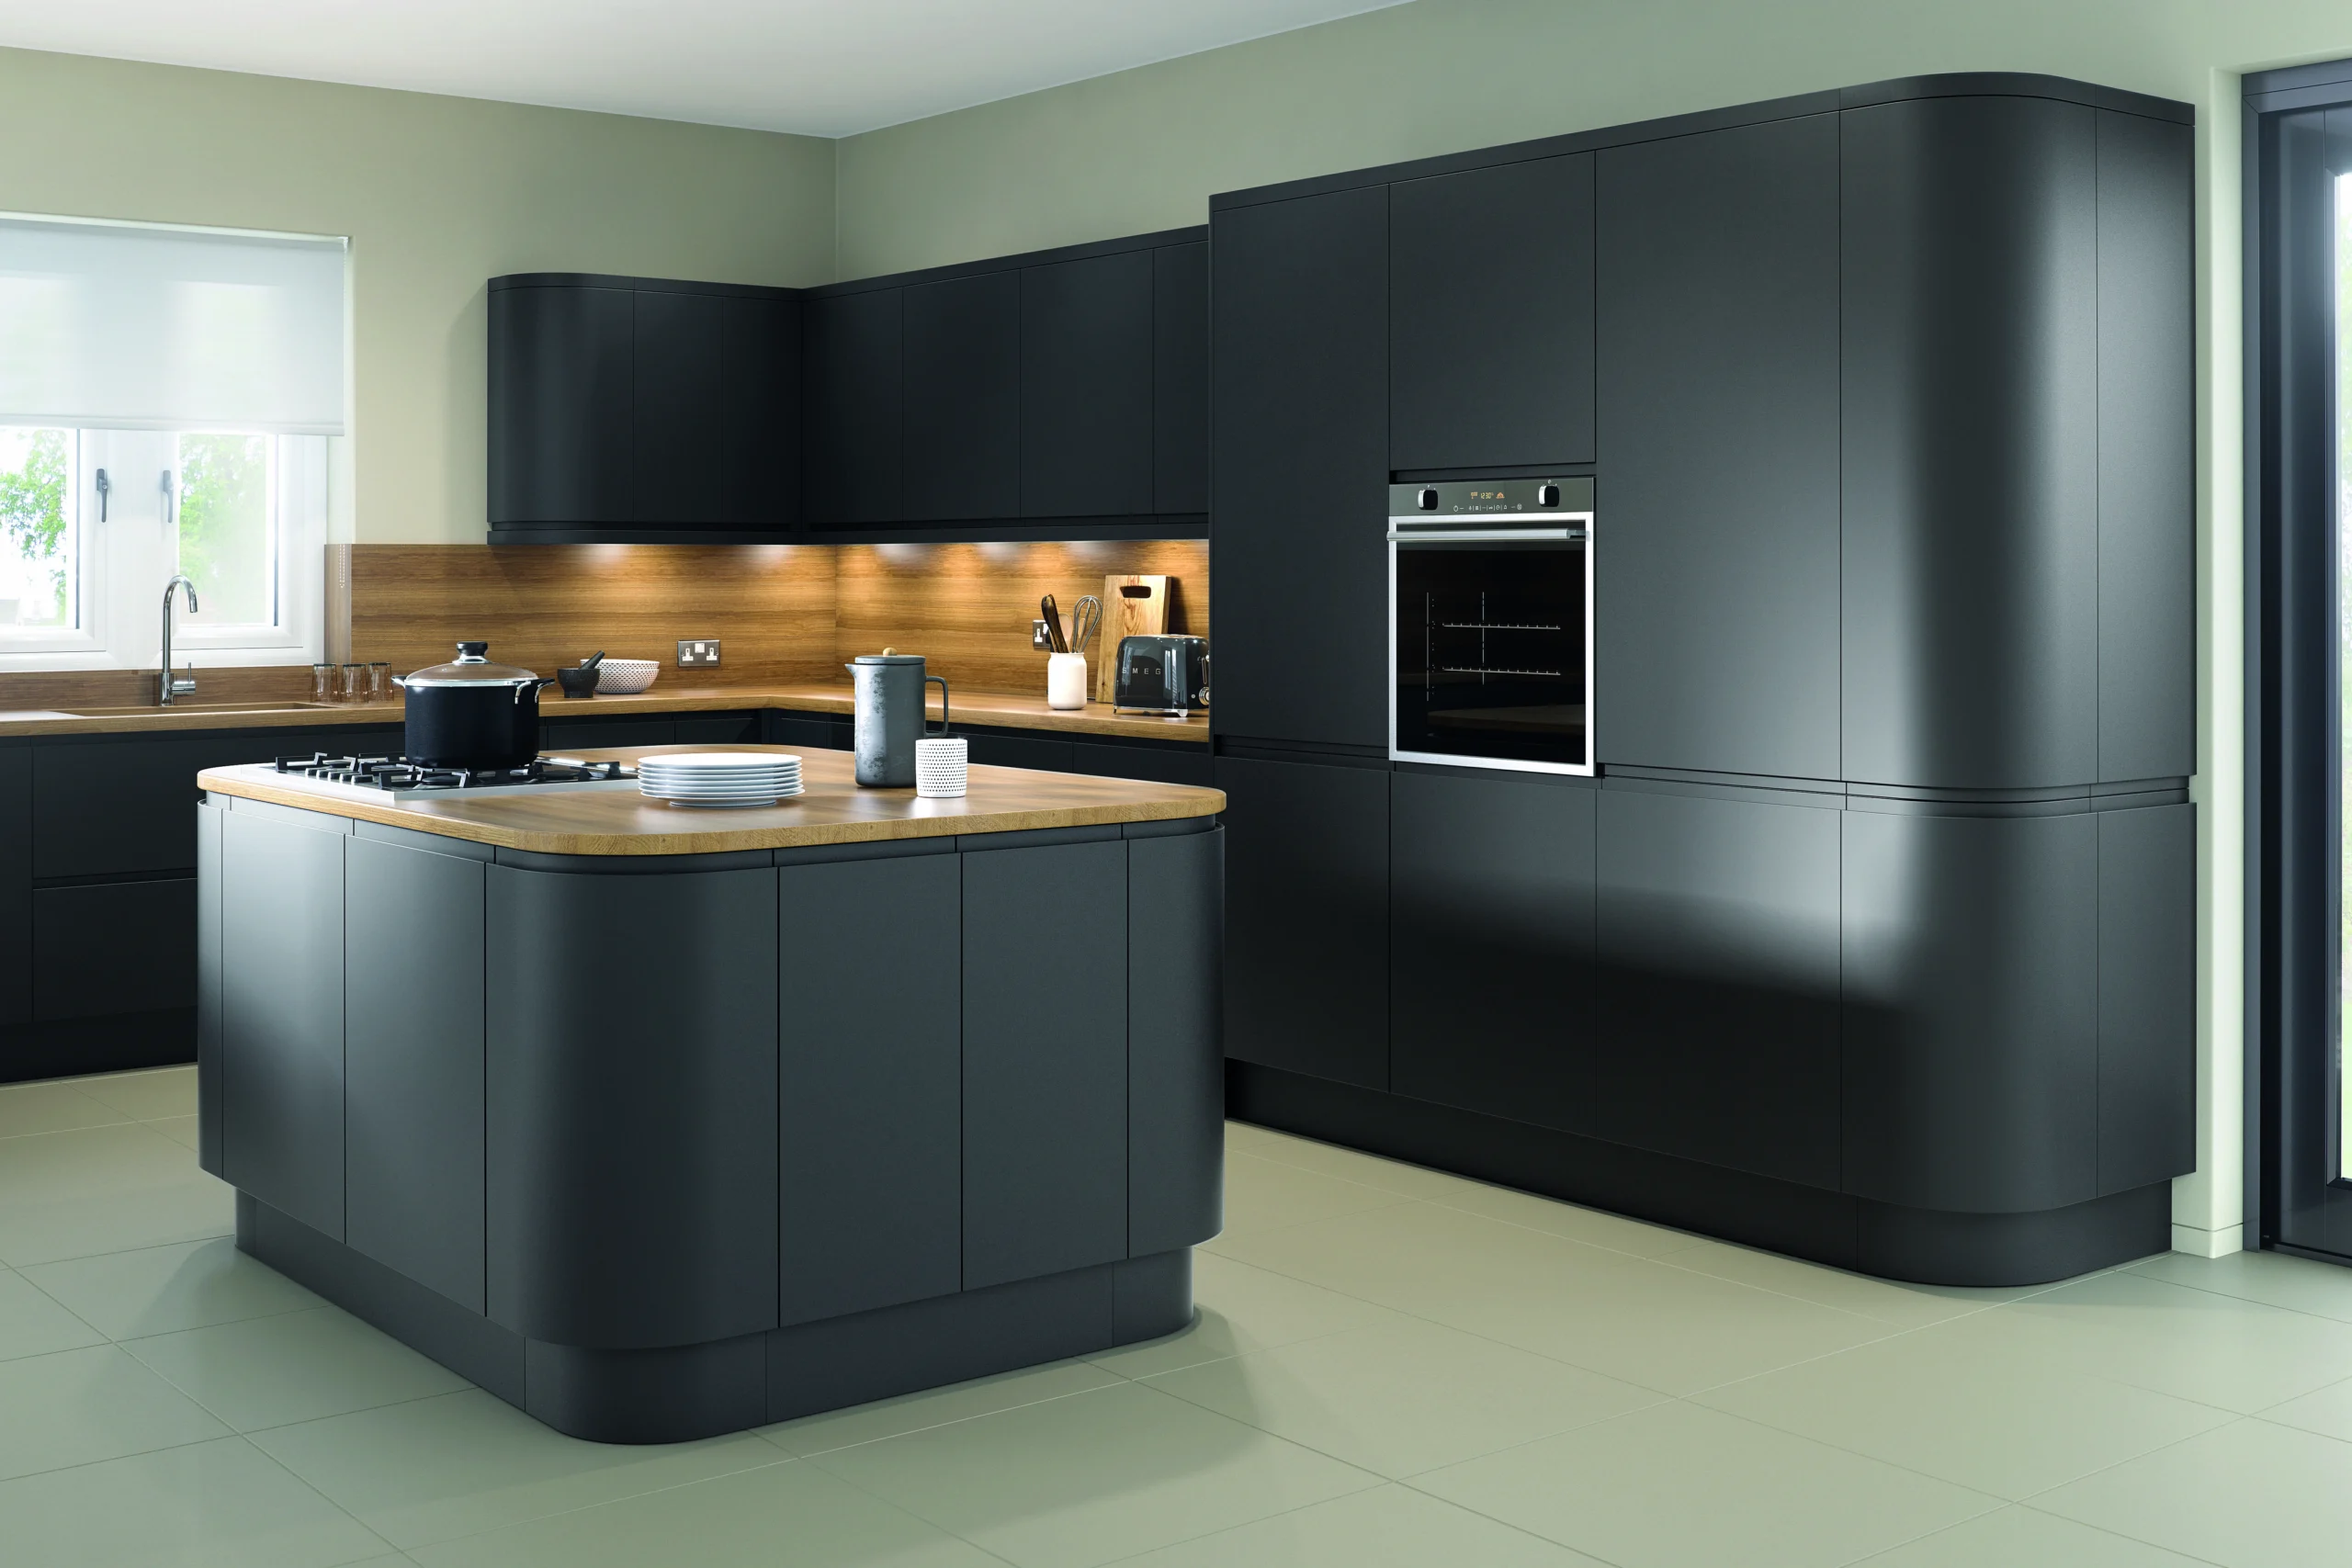 Modern kitchen showcasing seamless integration of black appliances with cabinetry, countertop, and flooring, creating a cohesive and stylish design.